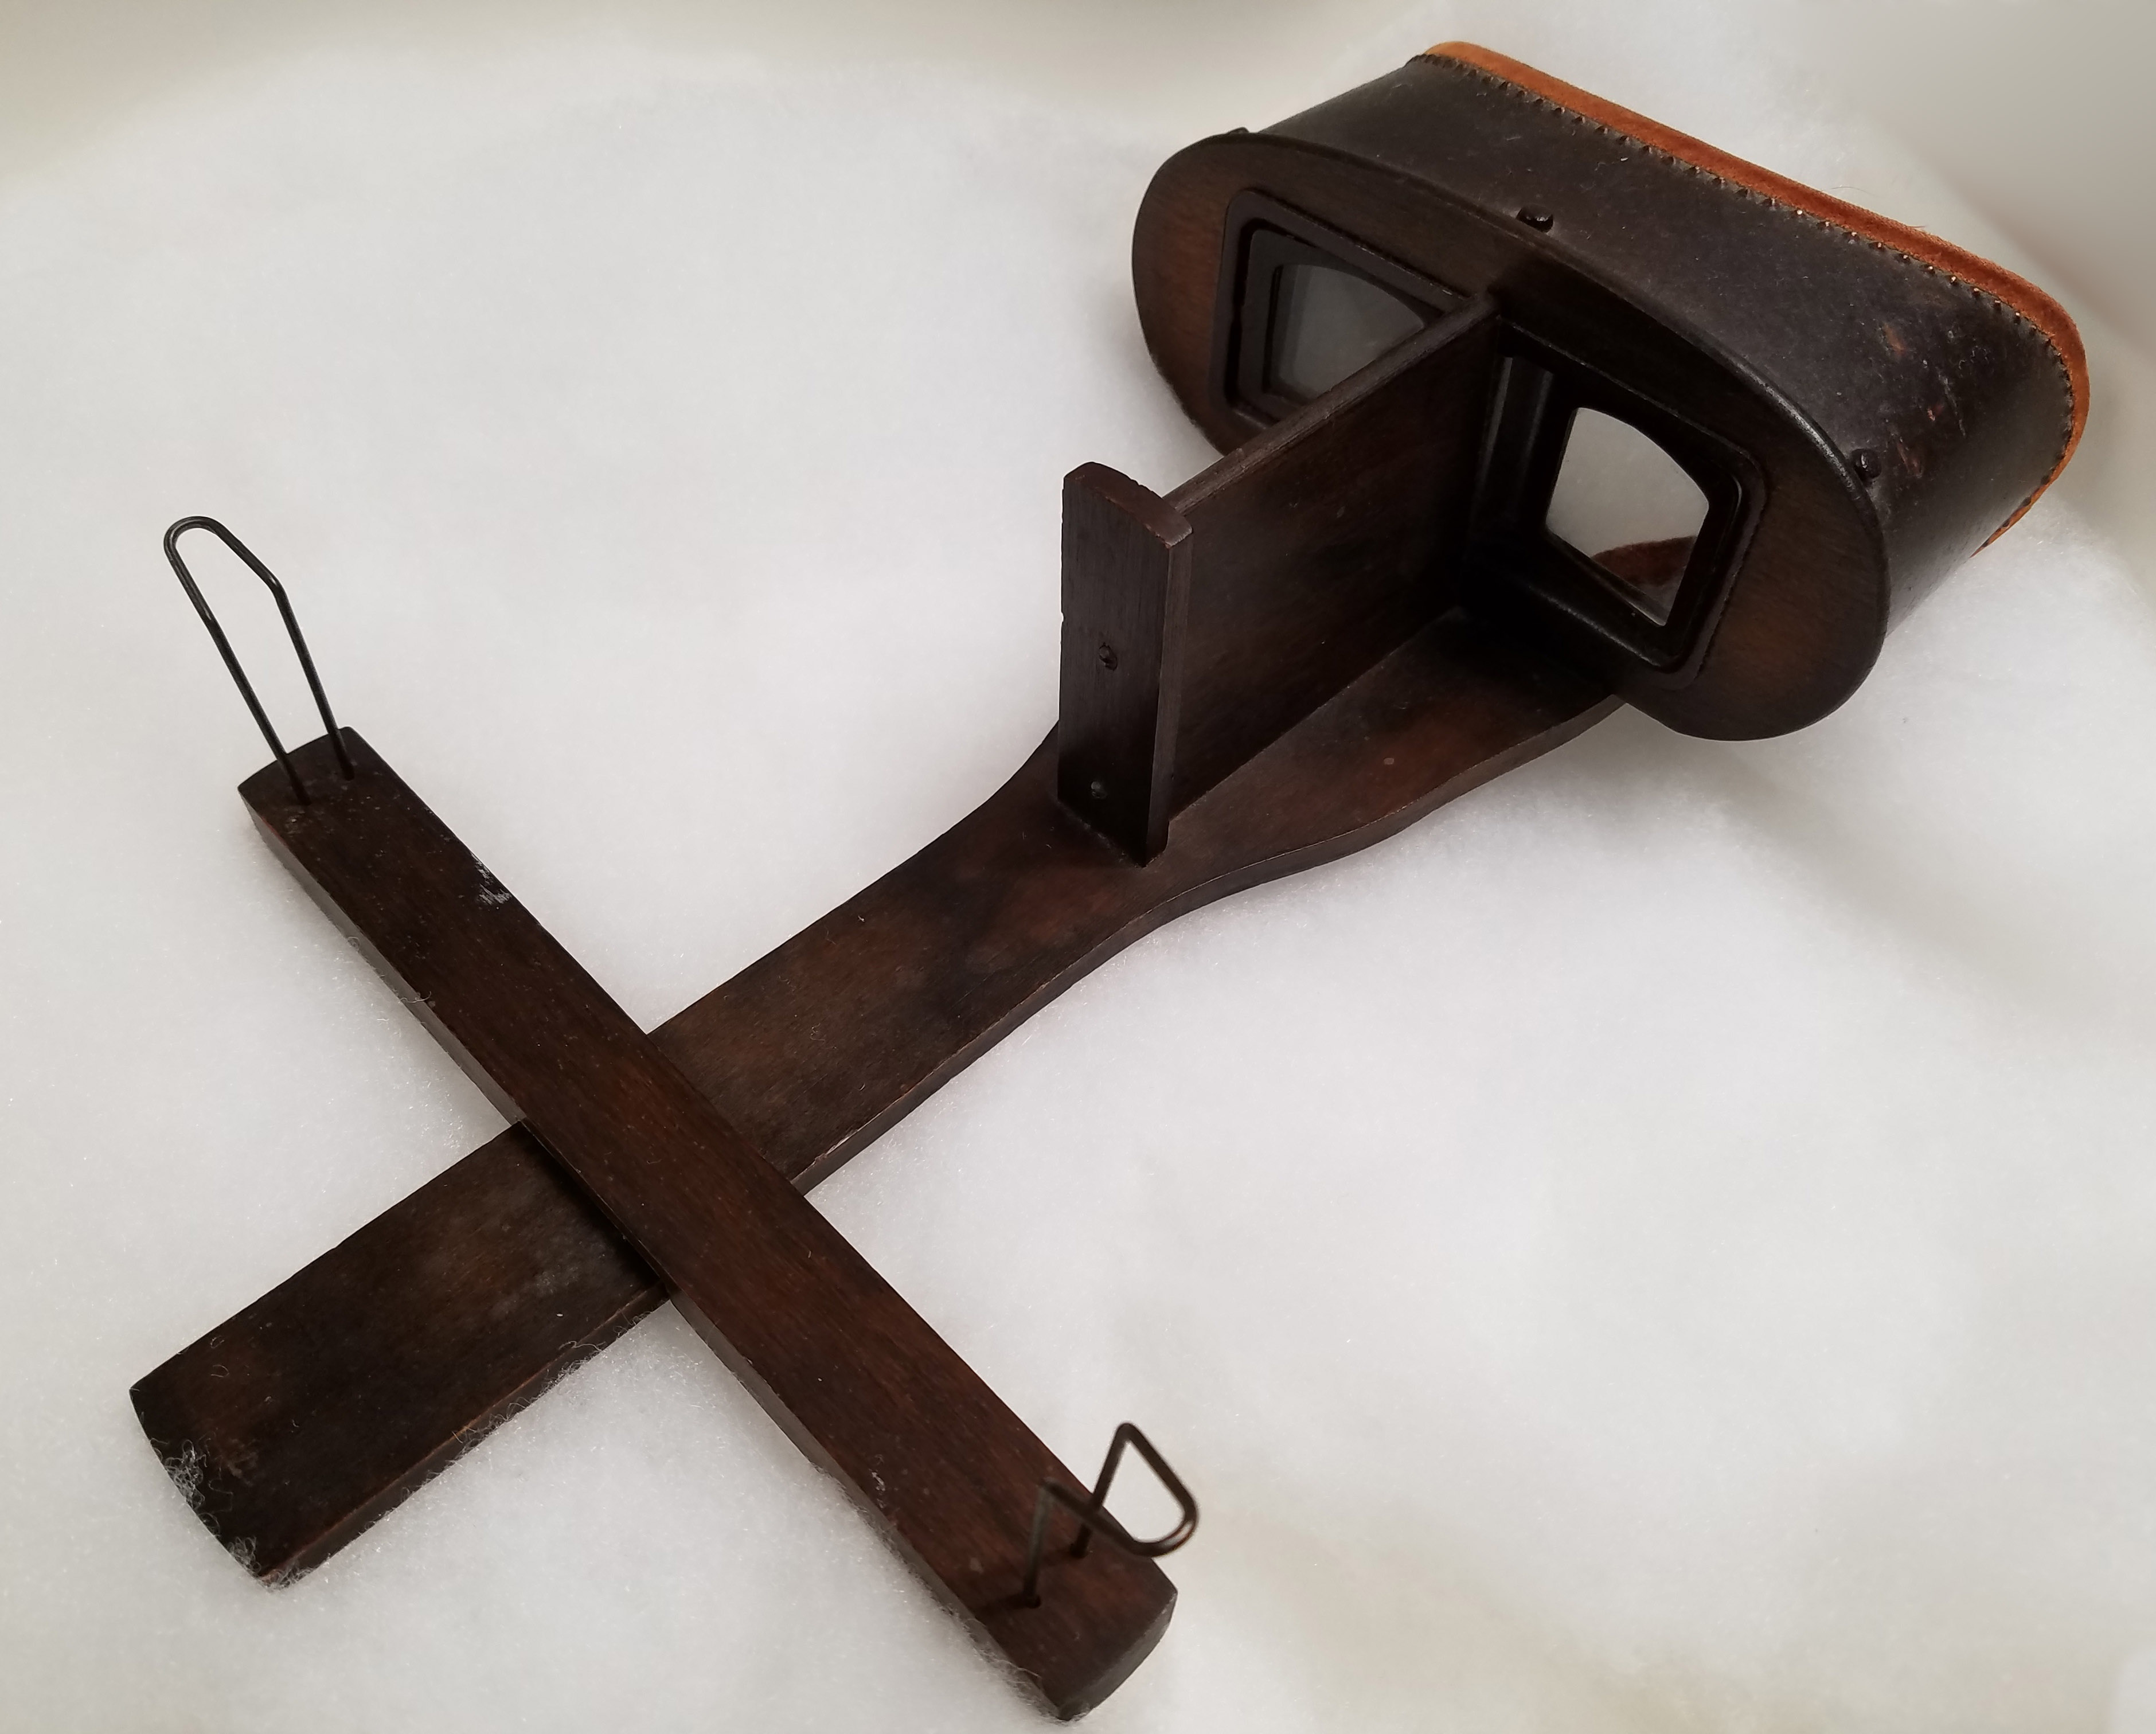 Depiction of Stereoscope